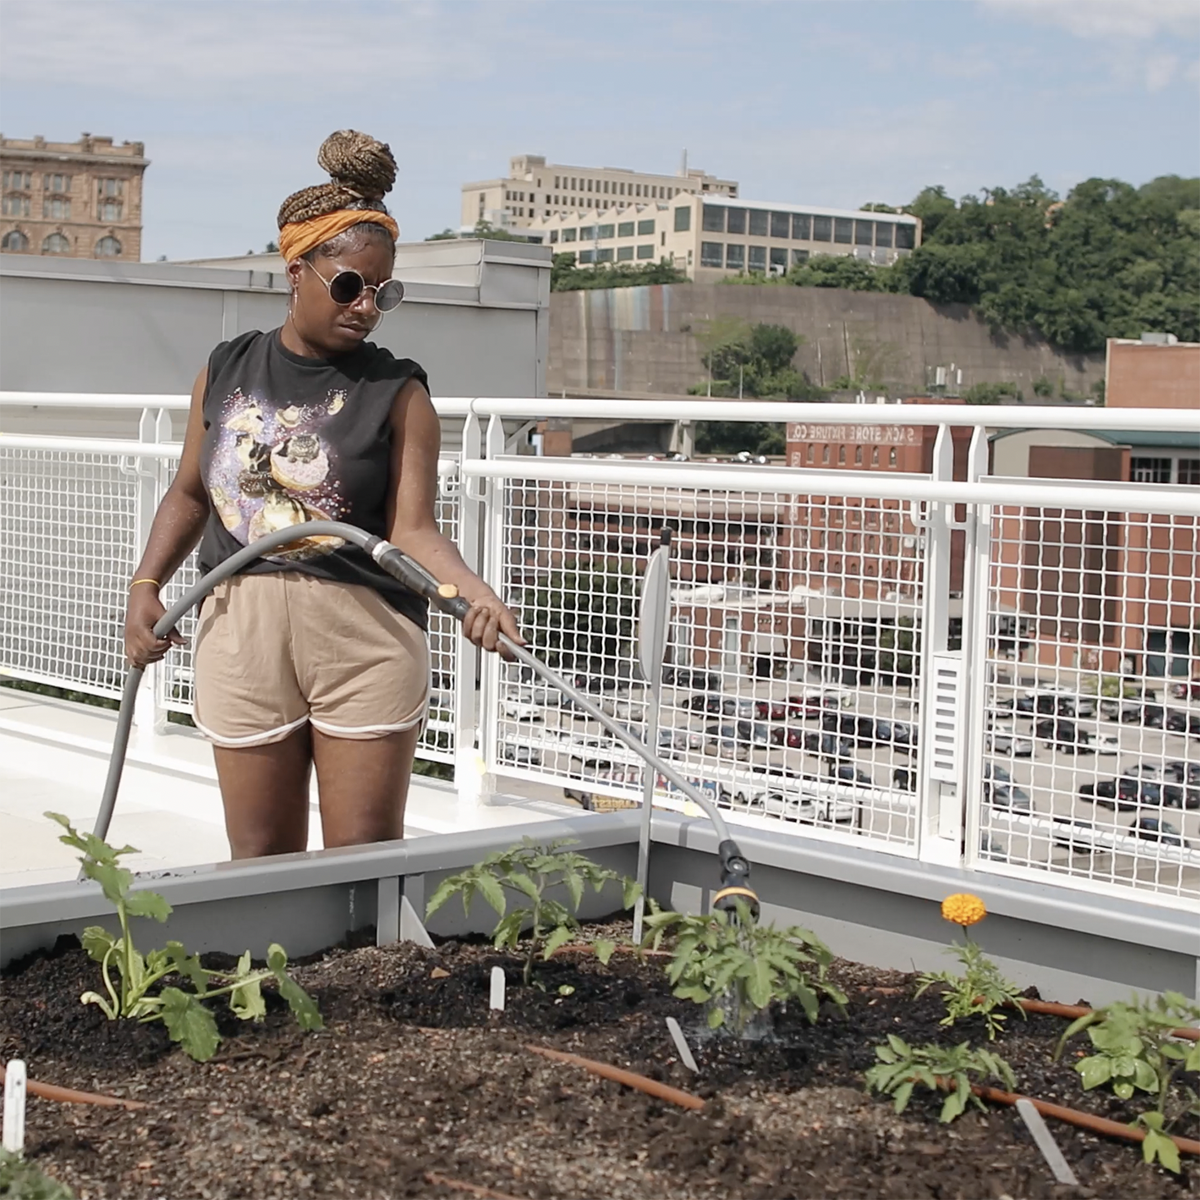 Photo of a student holding a hose and watering a raised garden bed full of plants on the rooftop garden